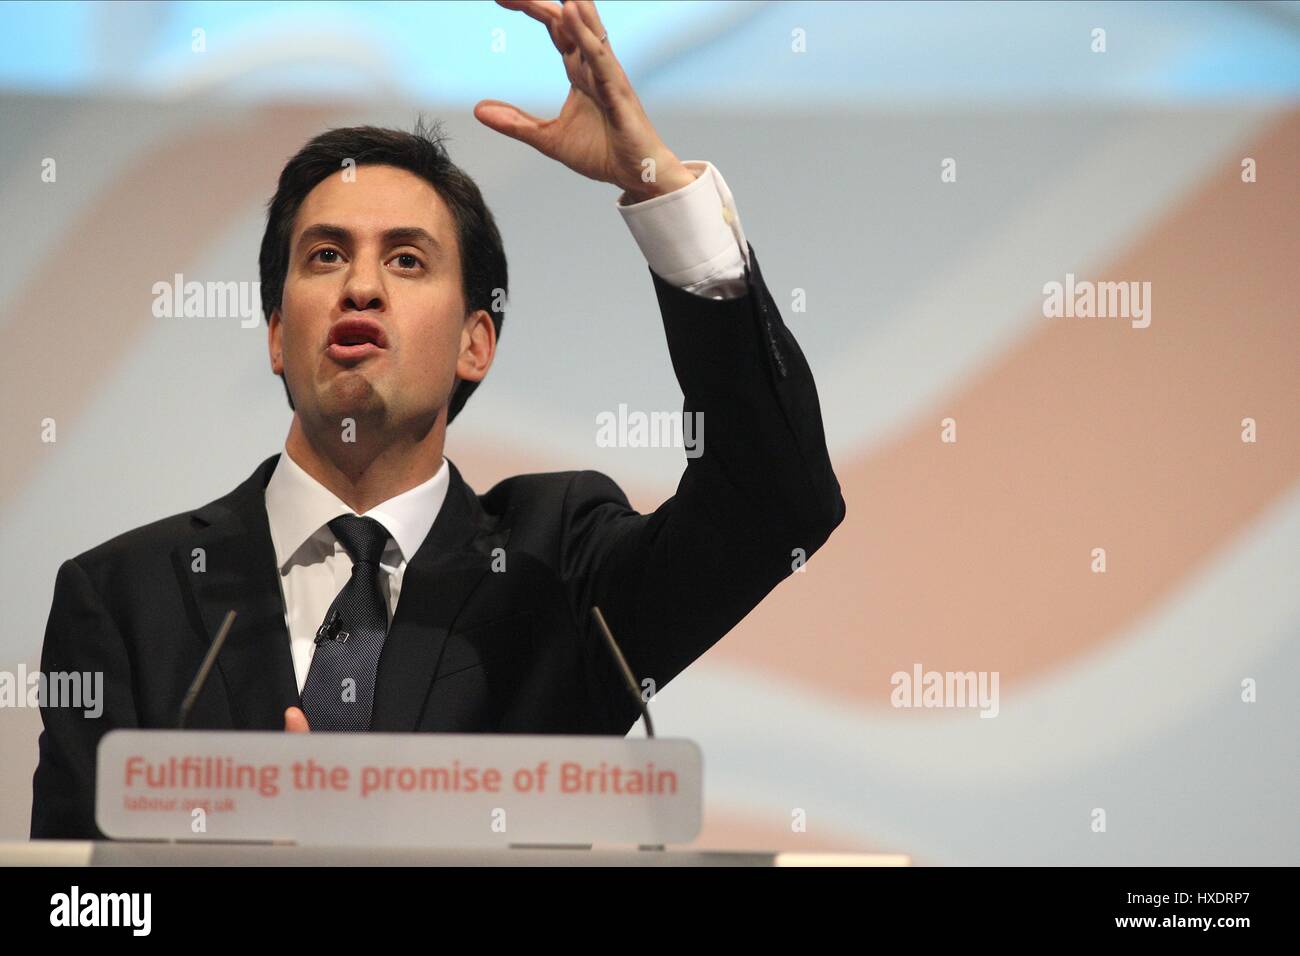 ED MILIBAND MP LABOUR PARTY LEADER 27 September 2011 THE AAC LIVERPOOL ENGLAND Stock Photo